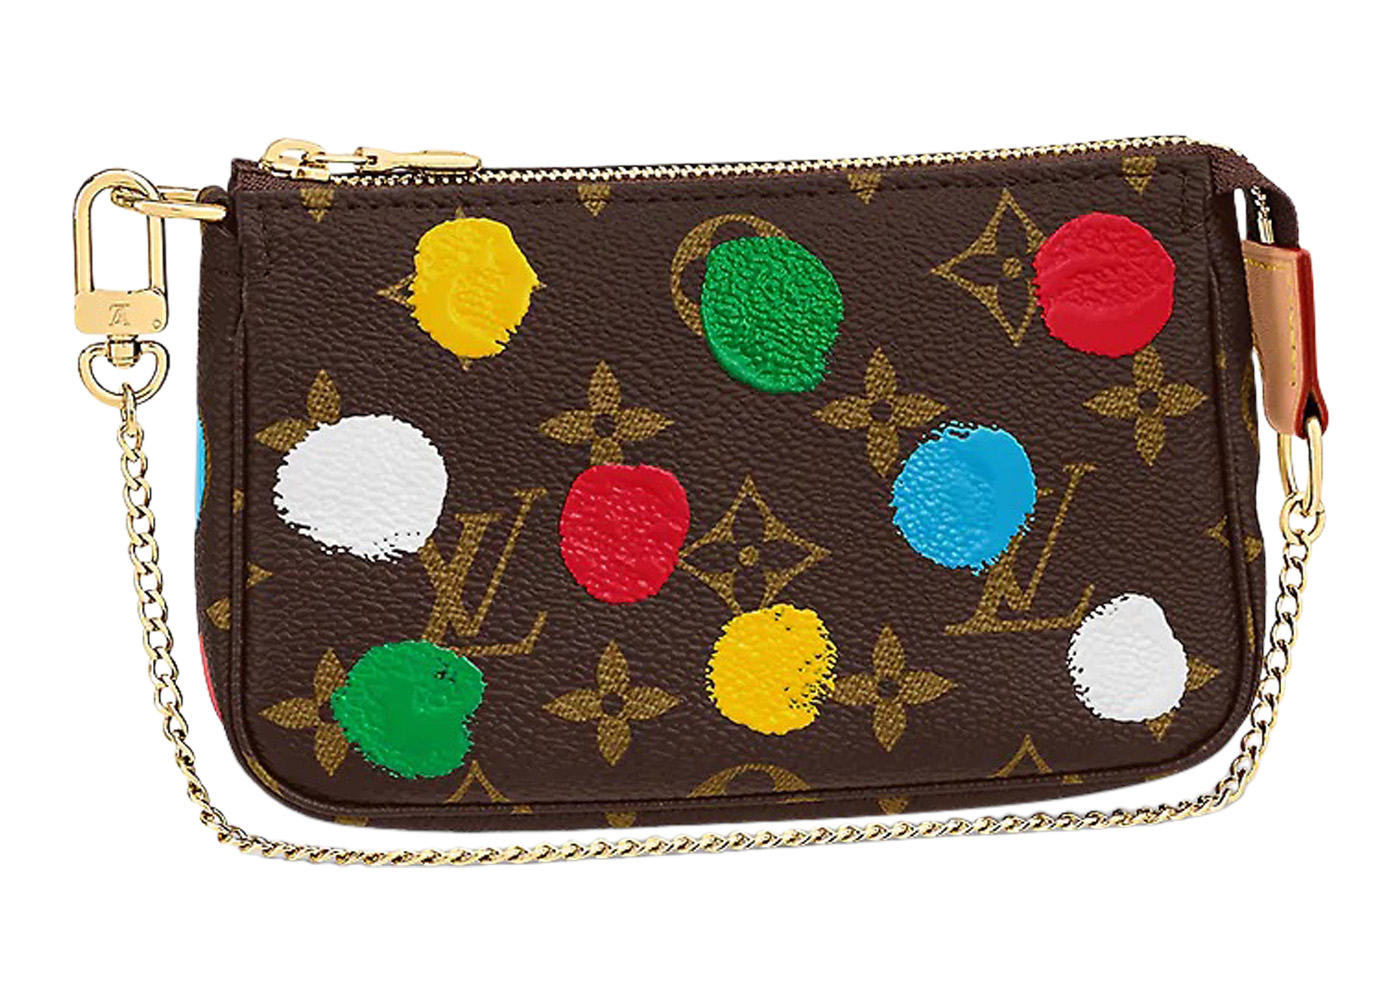 See the first set of bags from the Louis Vuitton x Yayoi Kusama  collaboration which debuted at the Cruise 2023 show